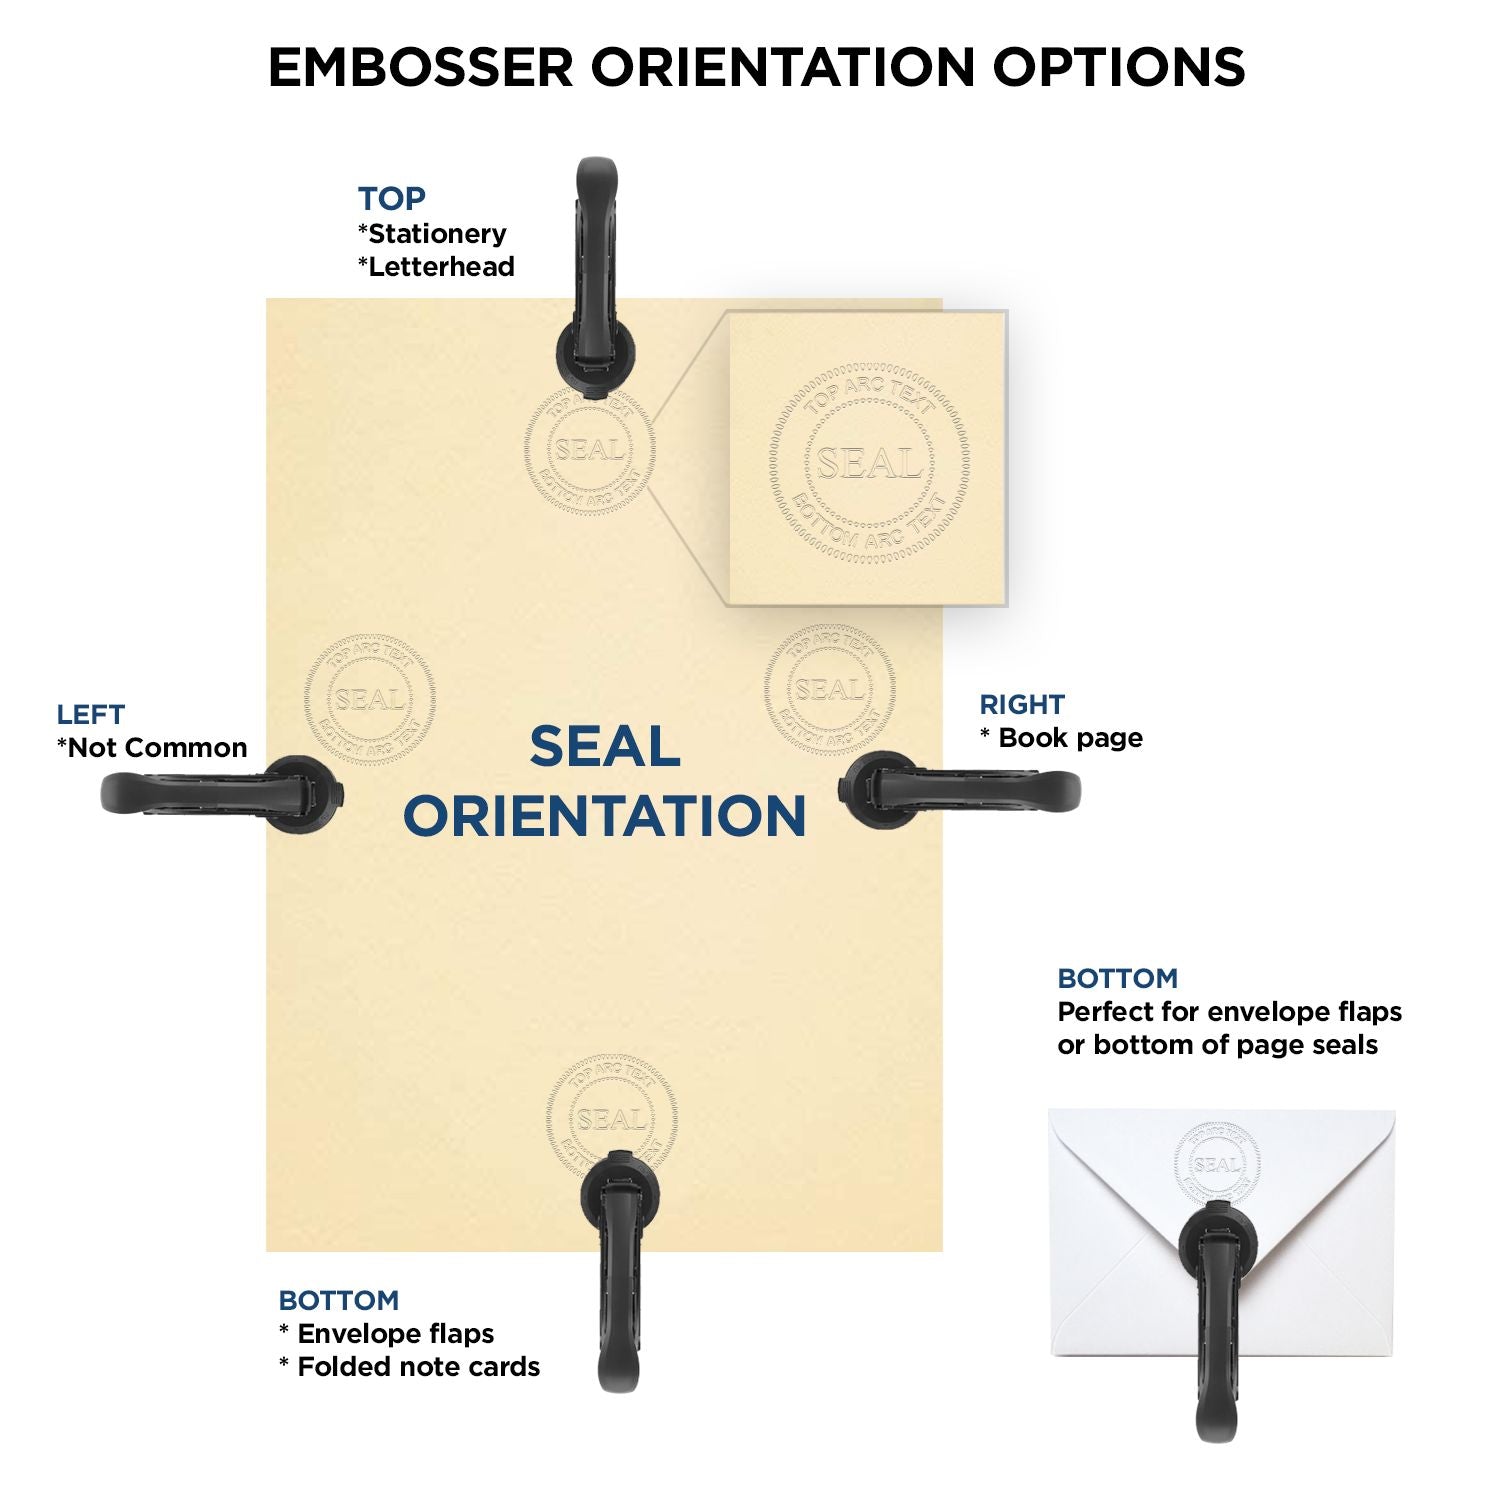 An infographic for the Heavy Duty Cast Iron North Carolina Architect Embosser showing embosser orientation, this is showing examples of a top, bottom, right and left insert.